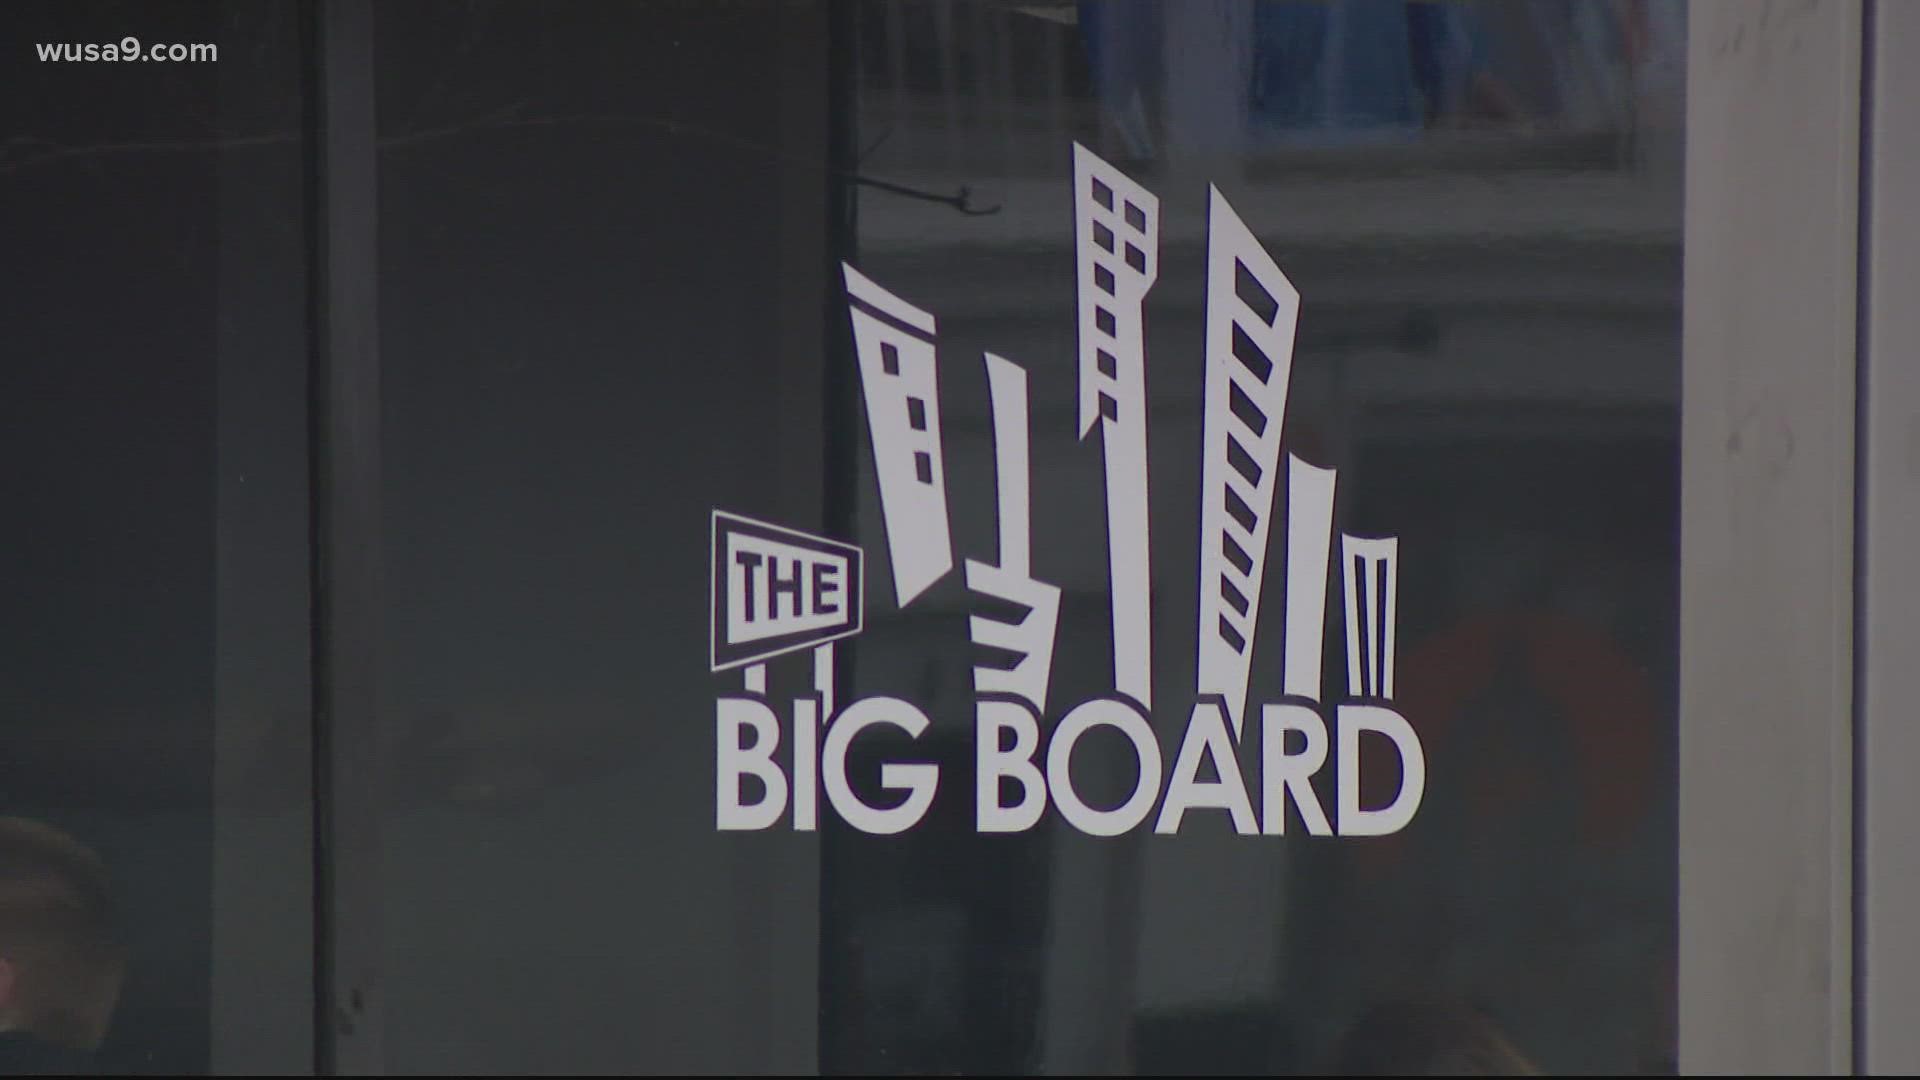 Big Board owner Eric Flannery was ordered to close after repeated warnings and fines by the D.C. government for not checking customers' vaccination cards.